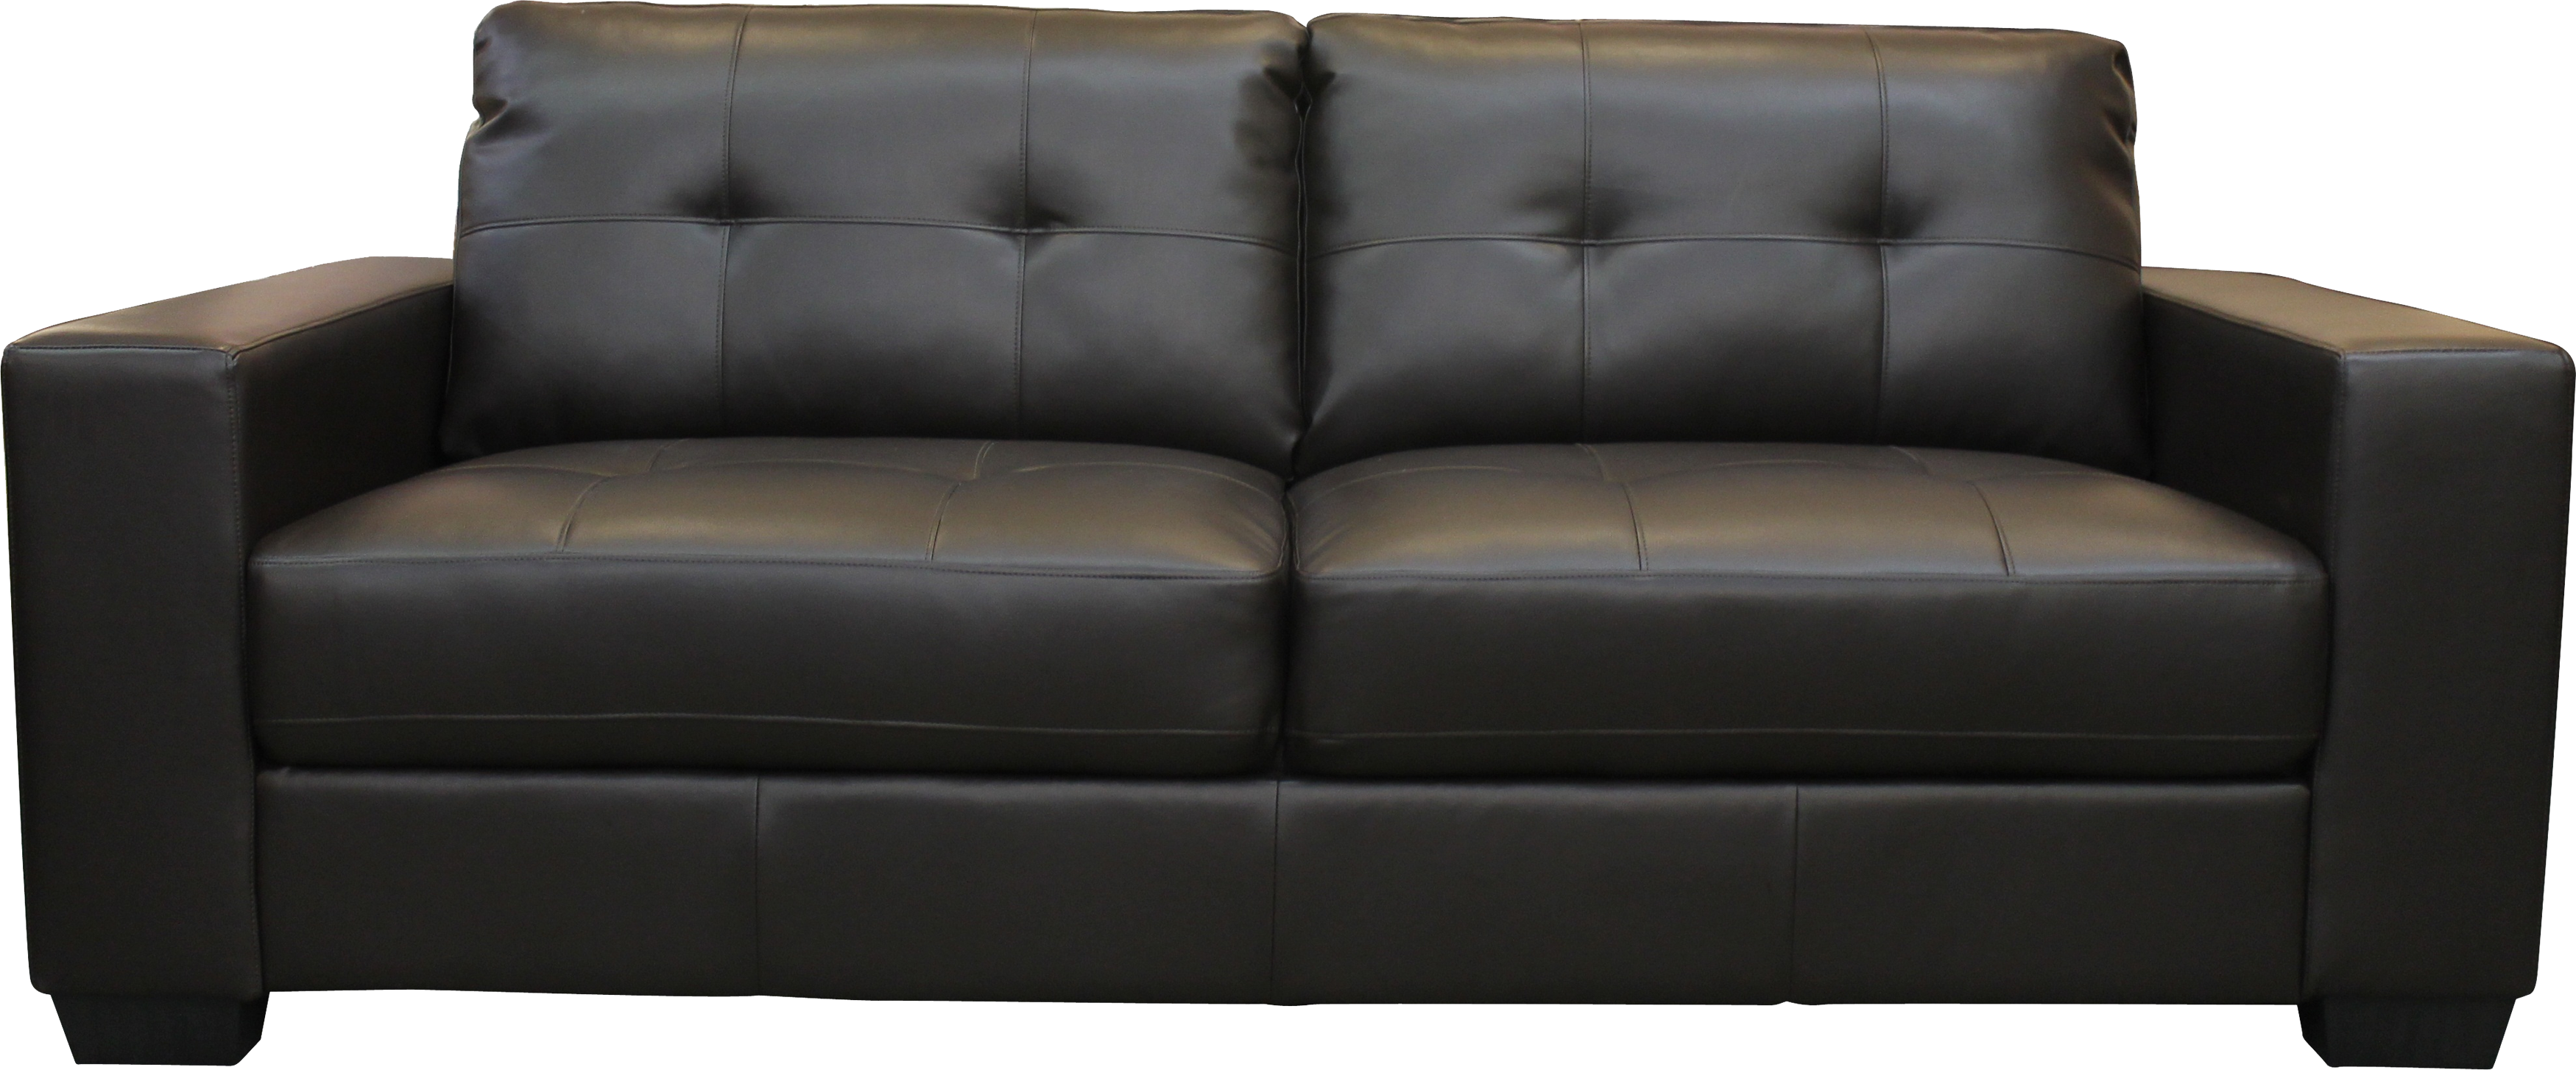 Couch HD PNG - 91459